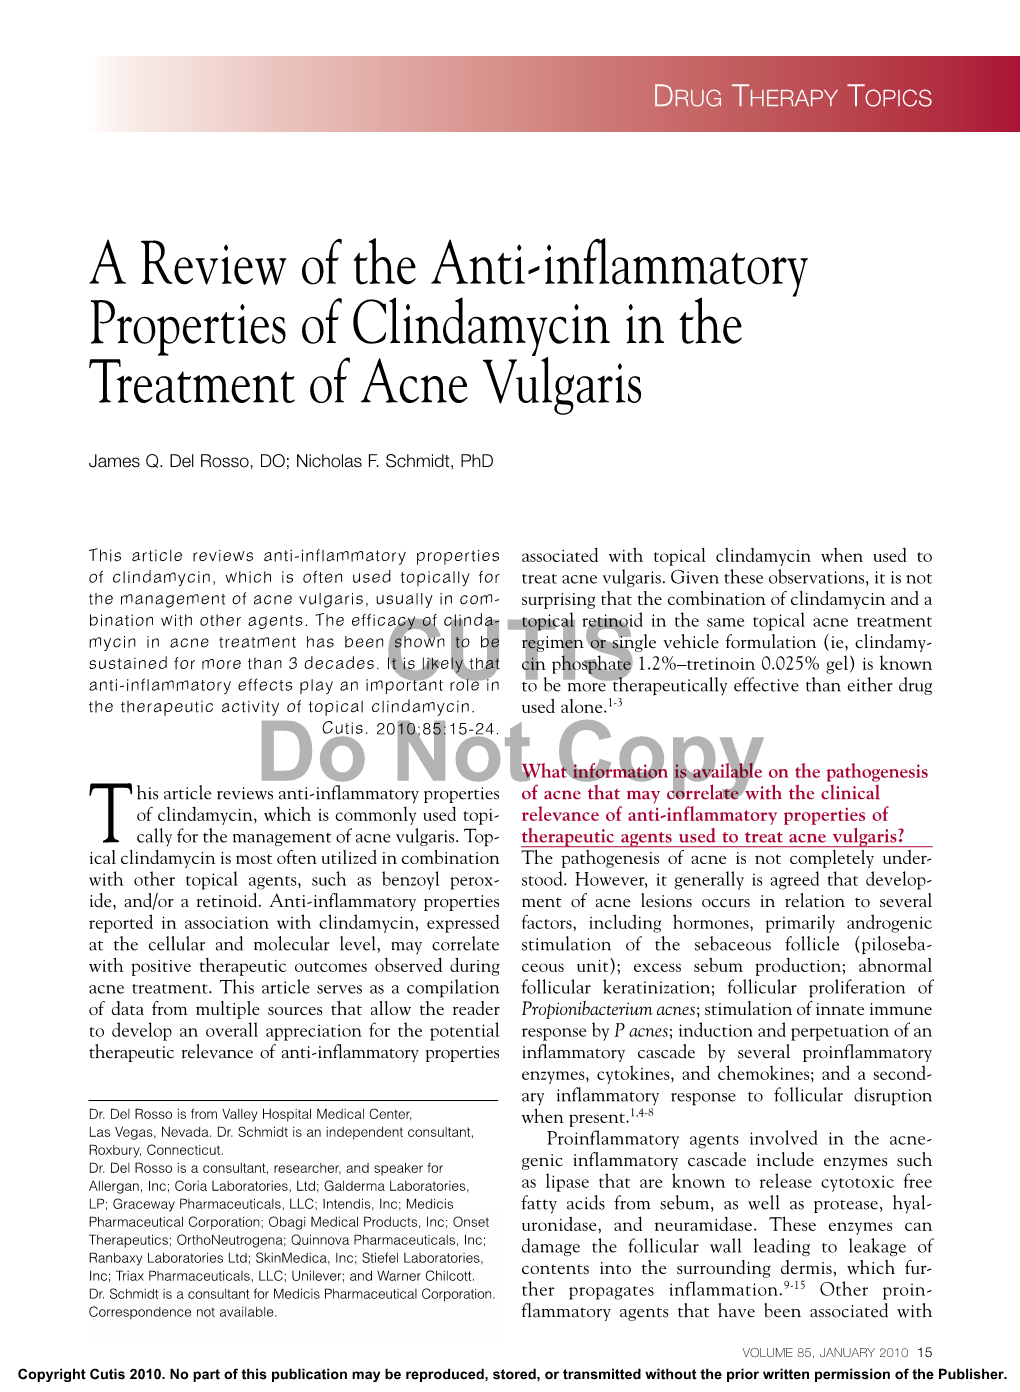 A Review of the Anti-Inflammatory Properties of Clindamycin in the Treatment of Acne Vulgaris